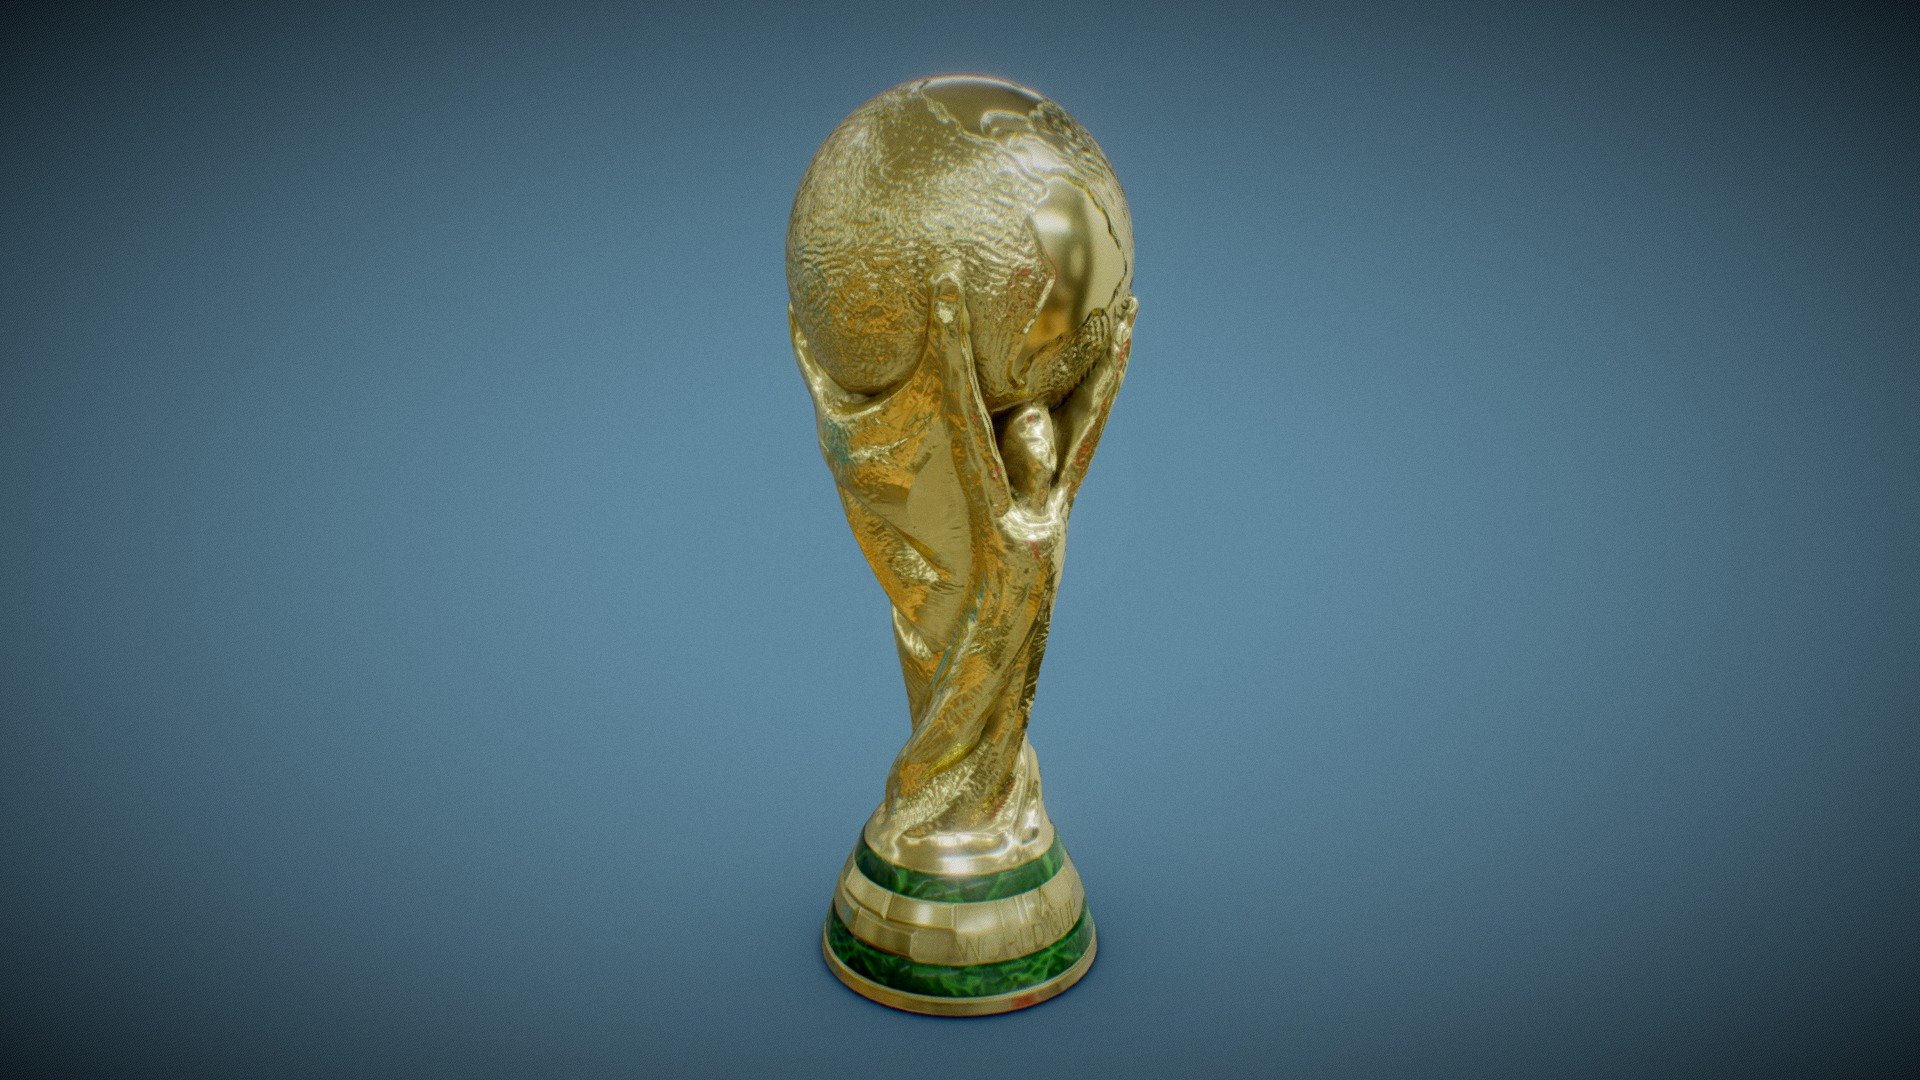 A Recreation of the FIFA World Cup Trophy

High poly sculpt and 3D Printing file are included in the Additional files

High Quality 4K PBR textures
Perfect for any Purpose - FIFA World Cup Trophy - Buy Royalty Free 3D model by Deftroy 3d model